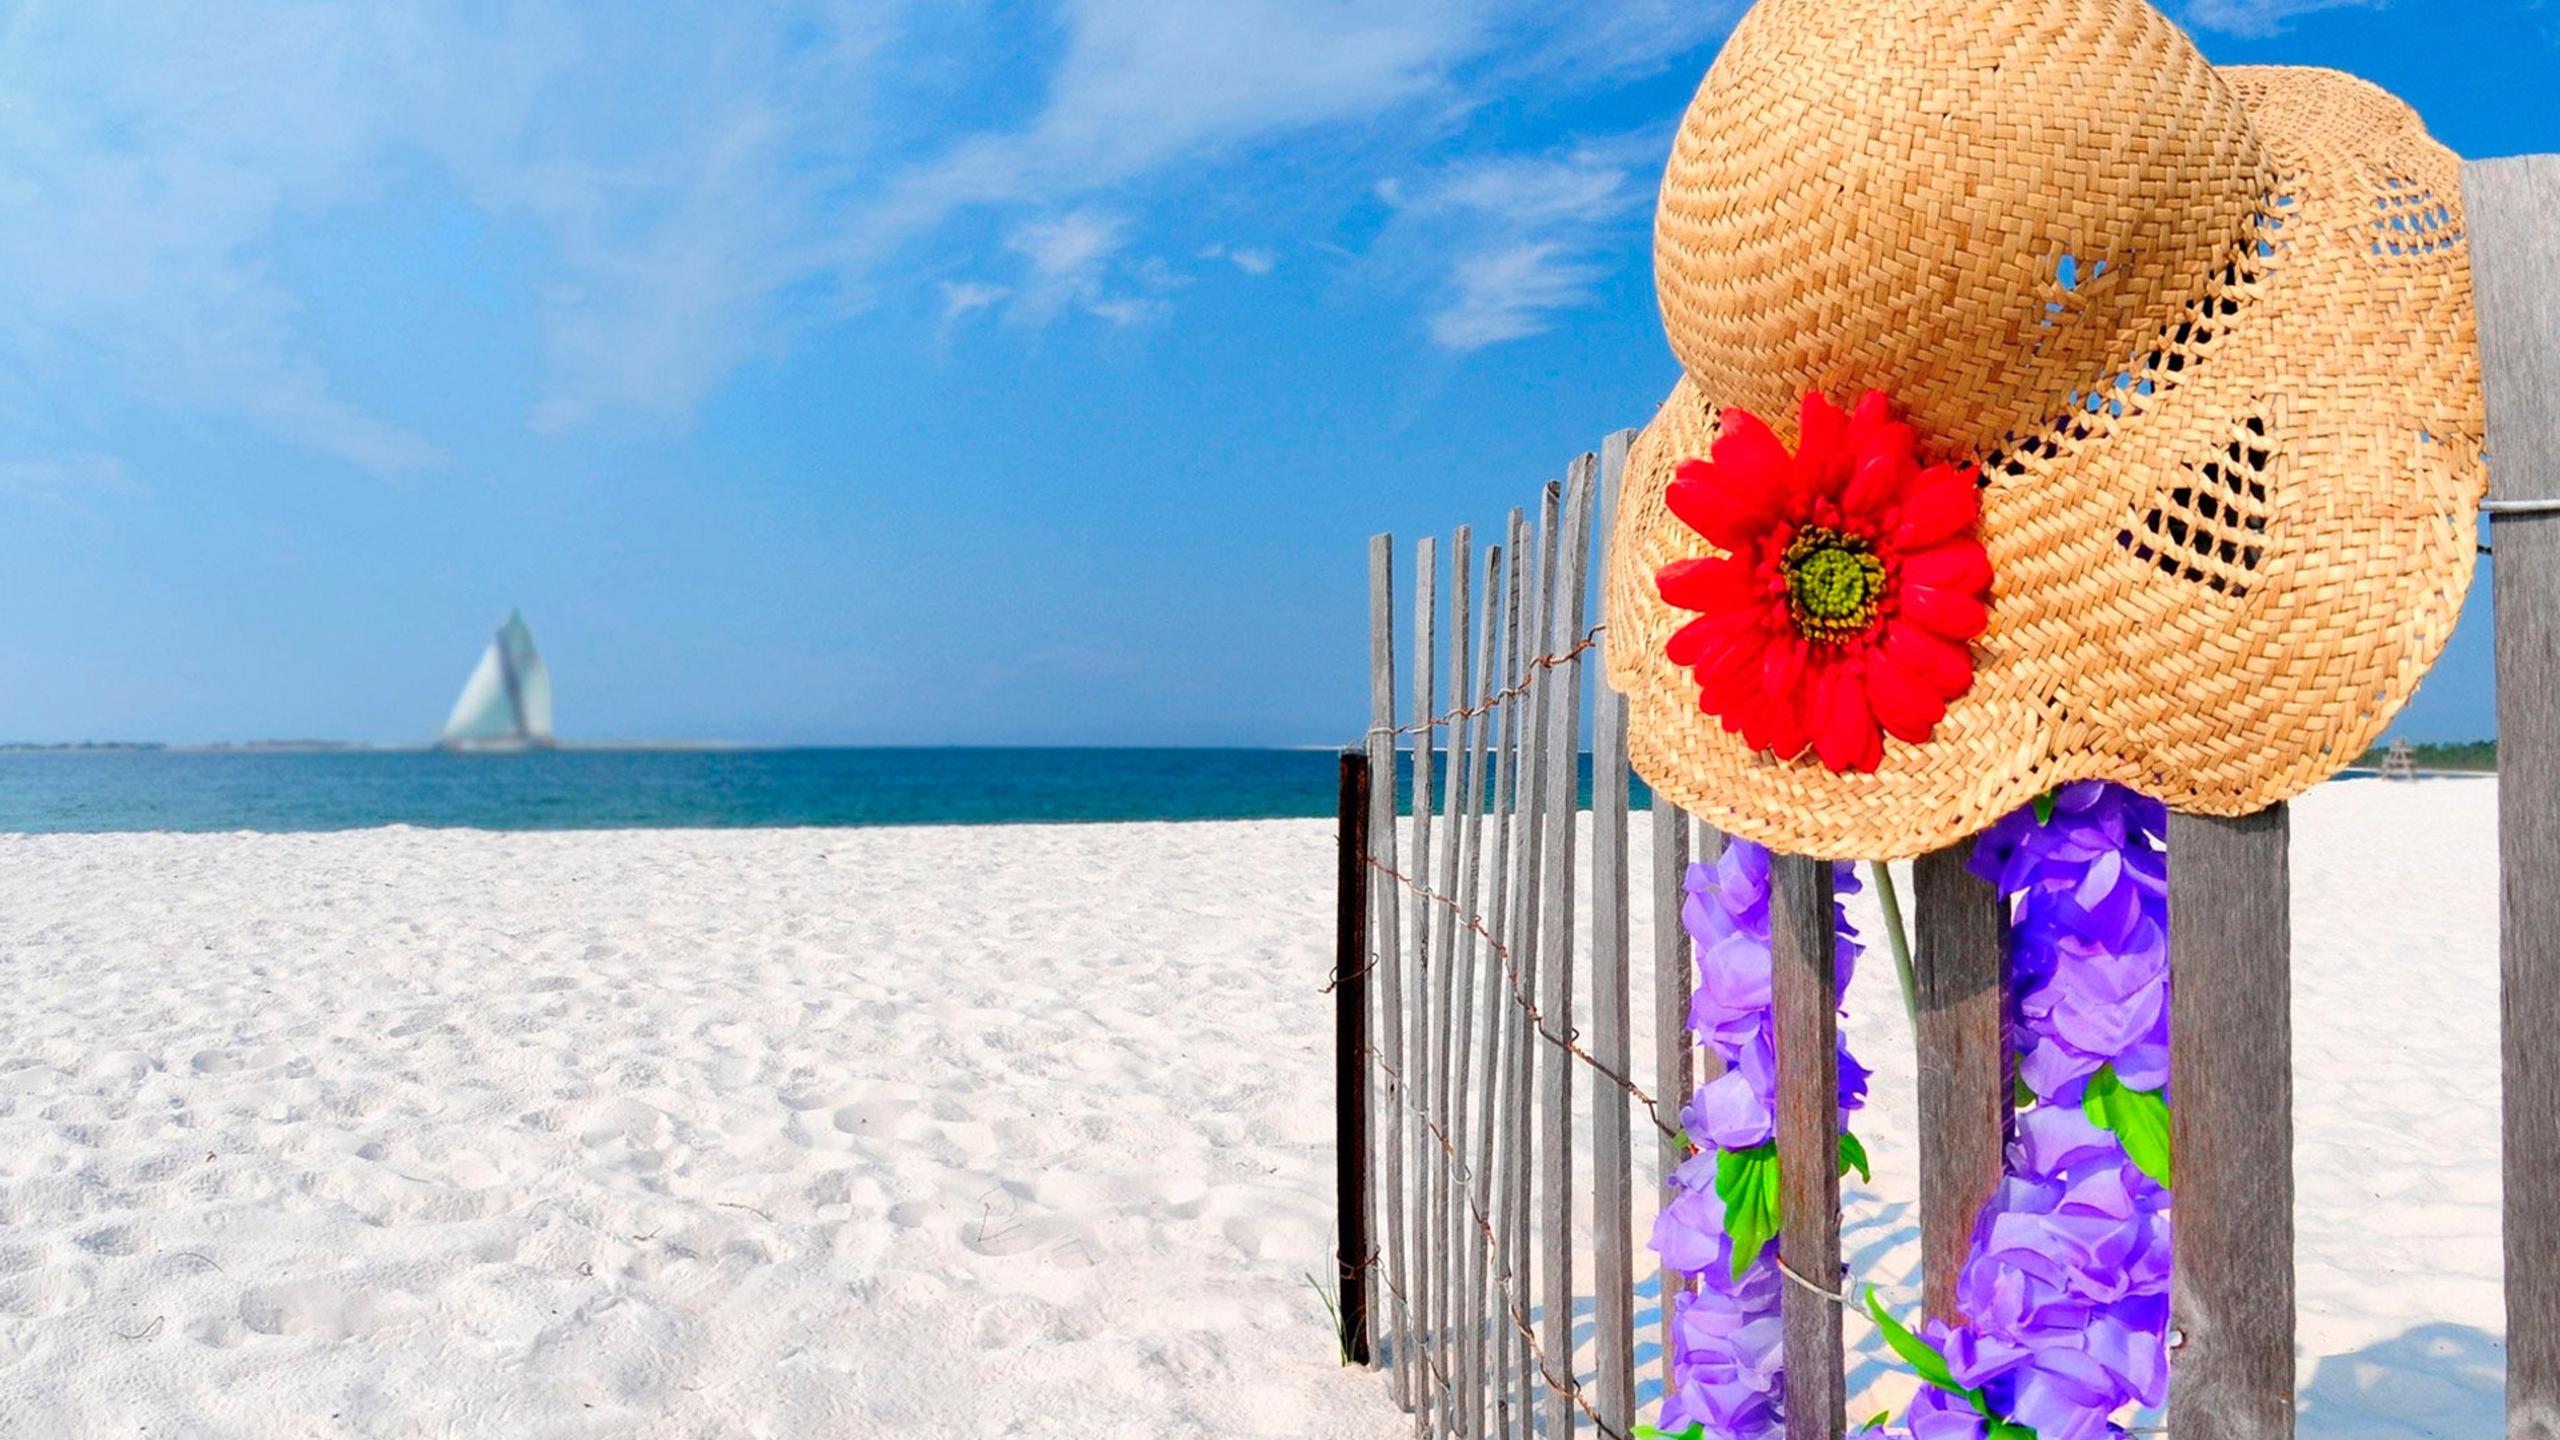 Summer hat perfect for seaside - HD wallpaper